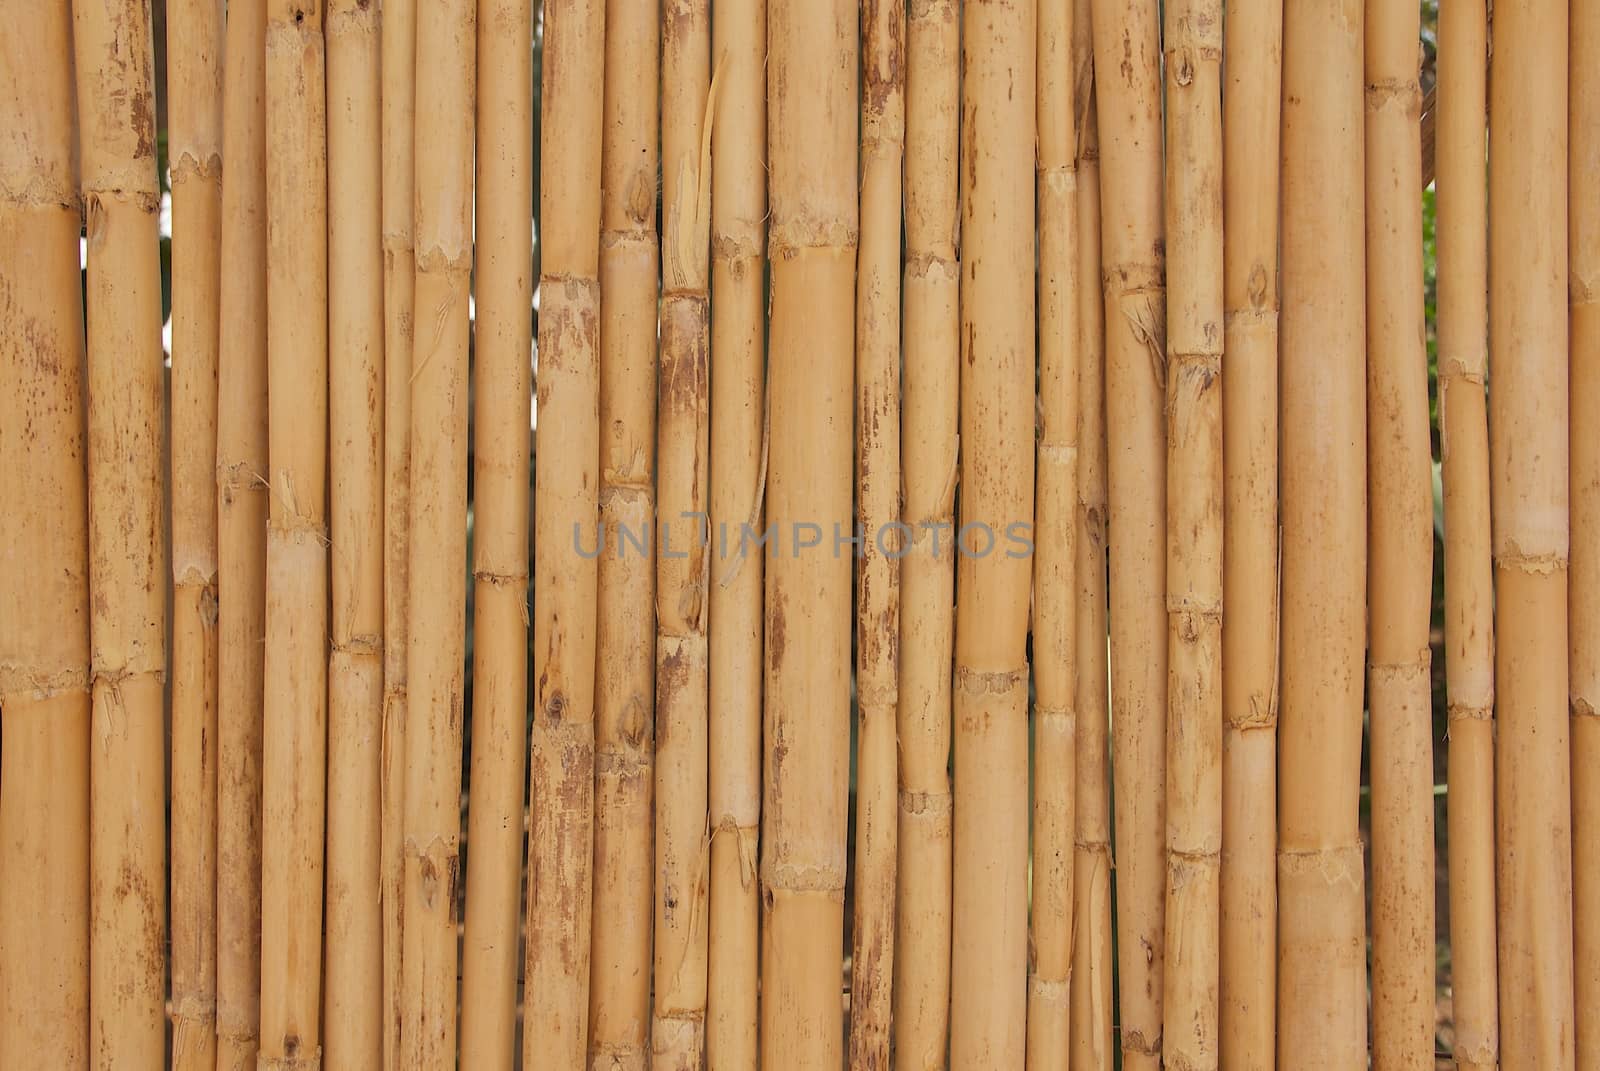 Dried bamboo sticks by tolikoff_photography